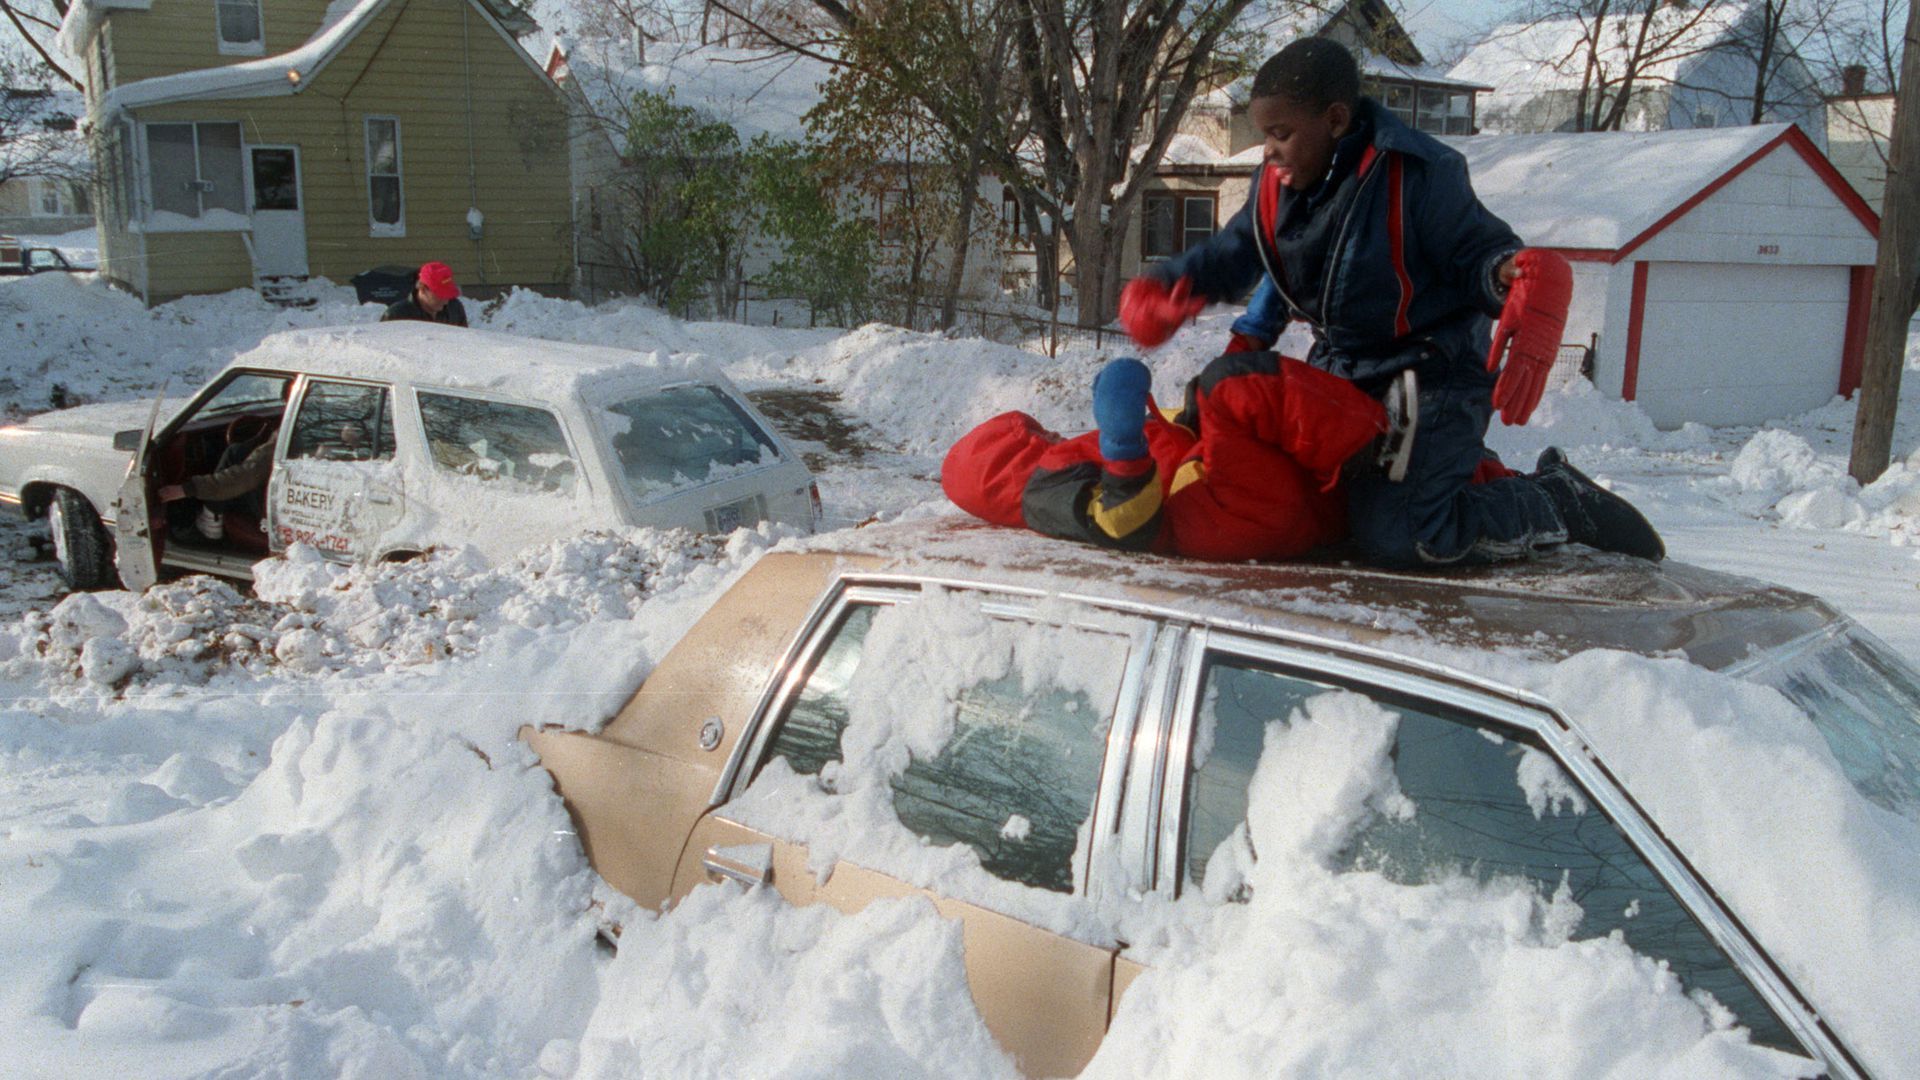 Kids play on top of cars covered in snow during the Halloween Blizzard of 1991.